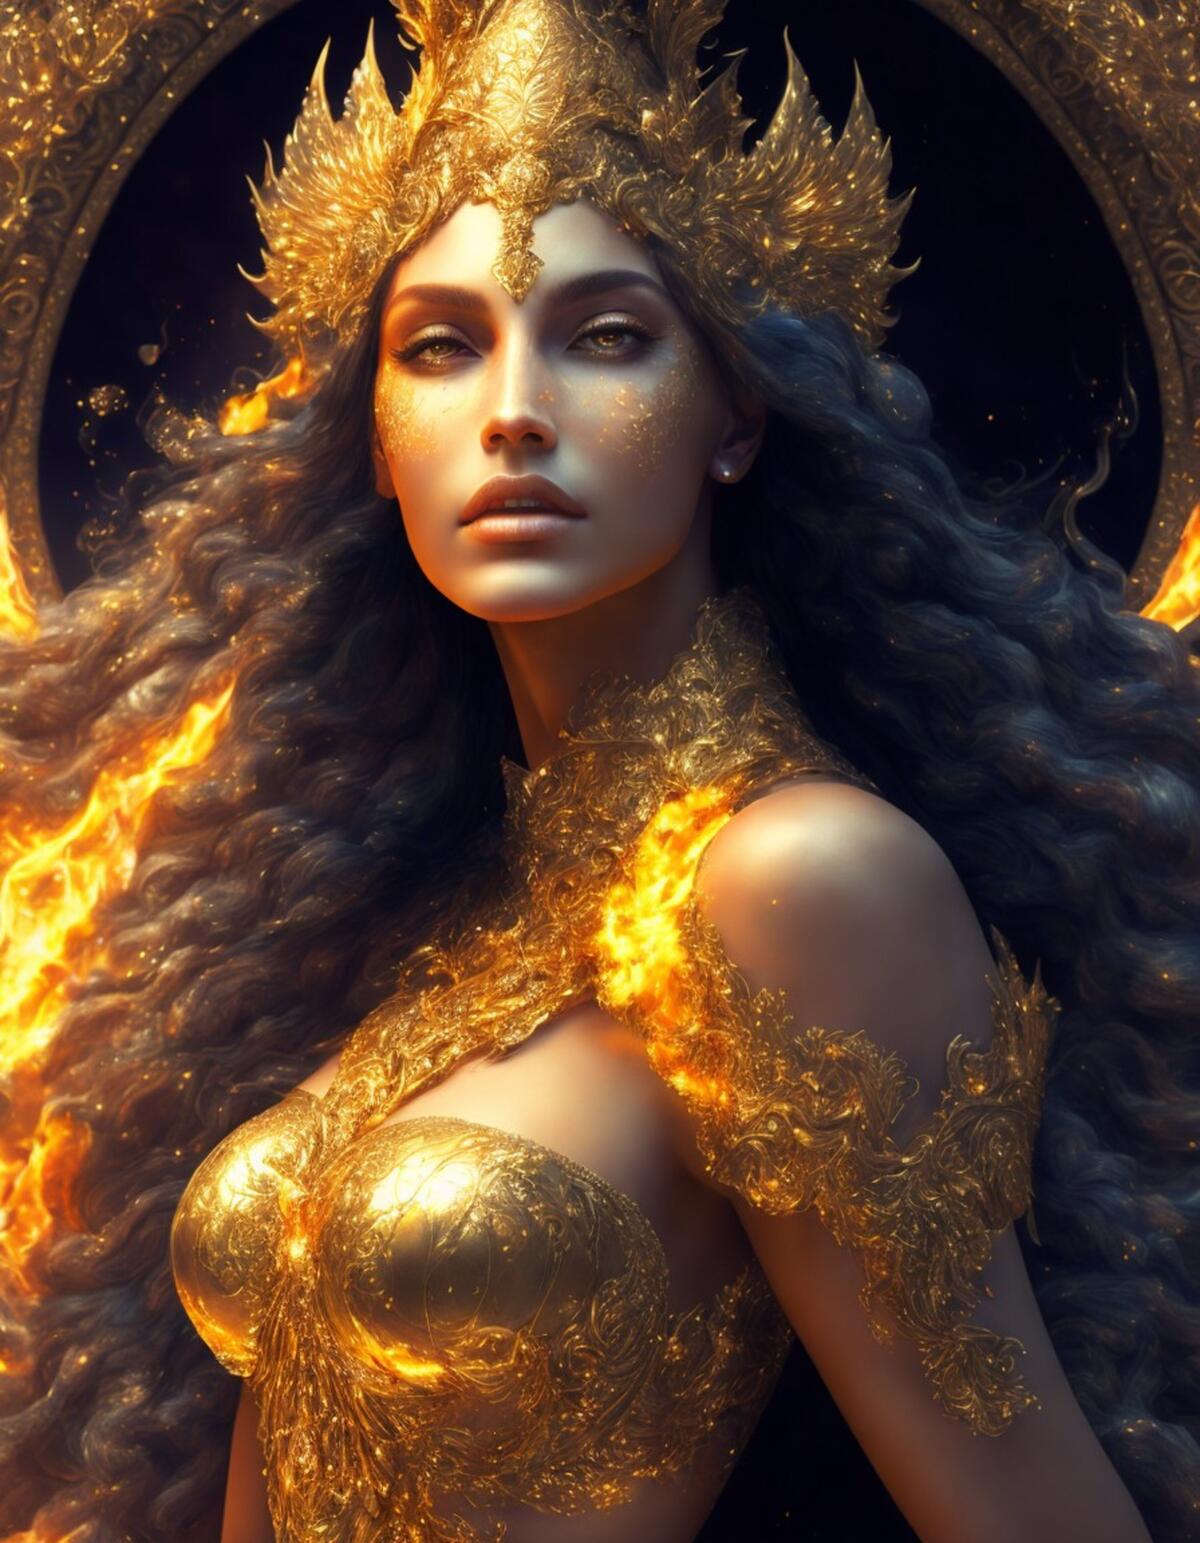 The girl in gold